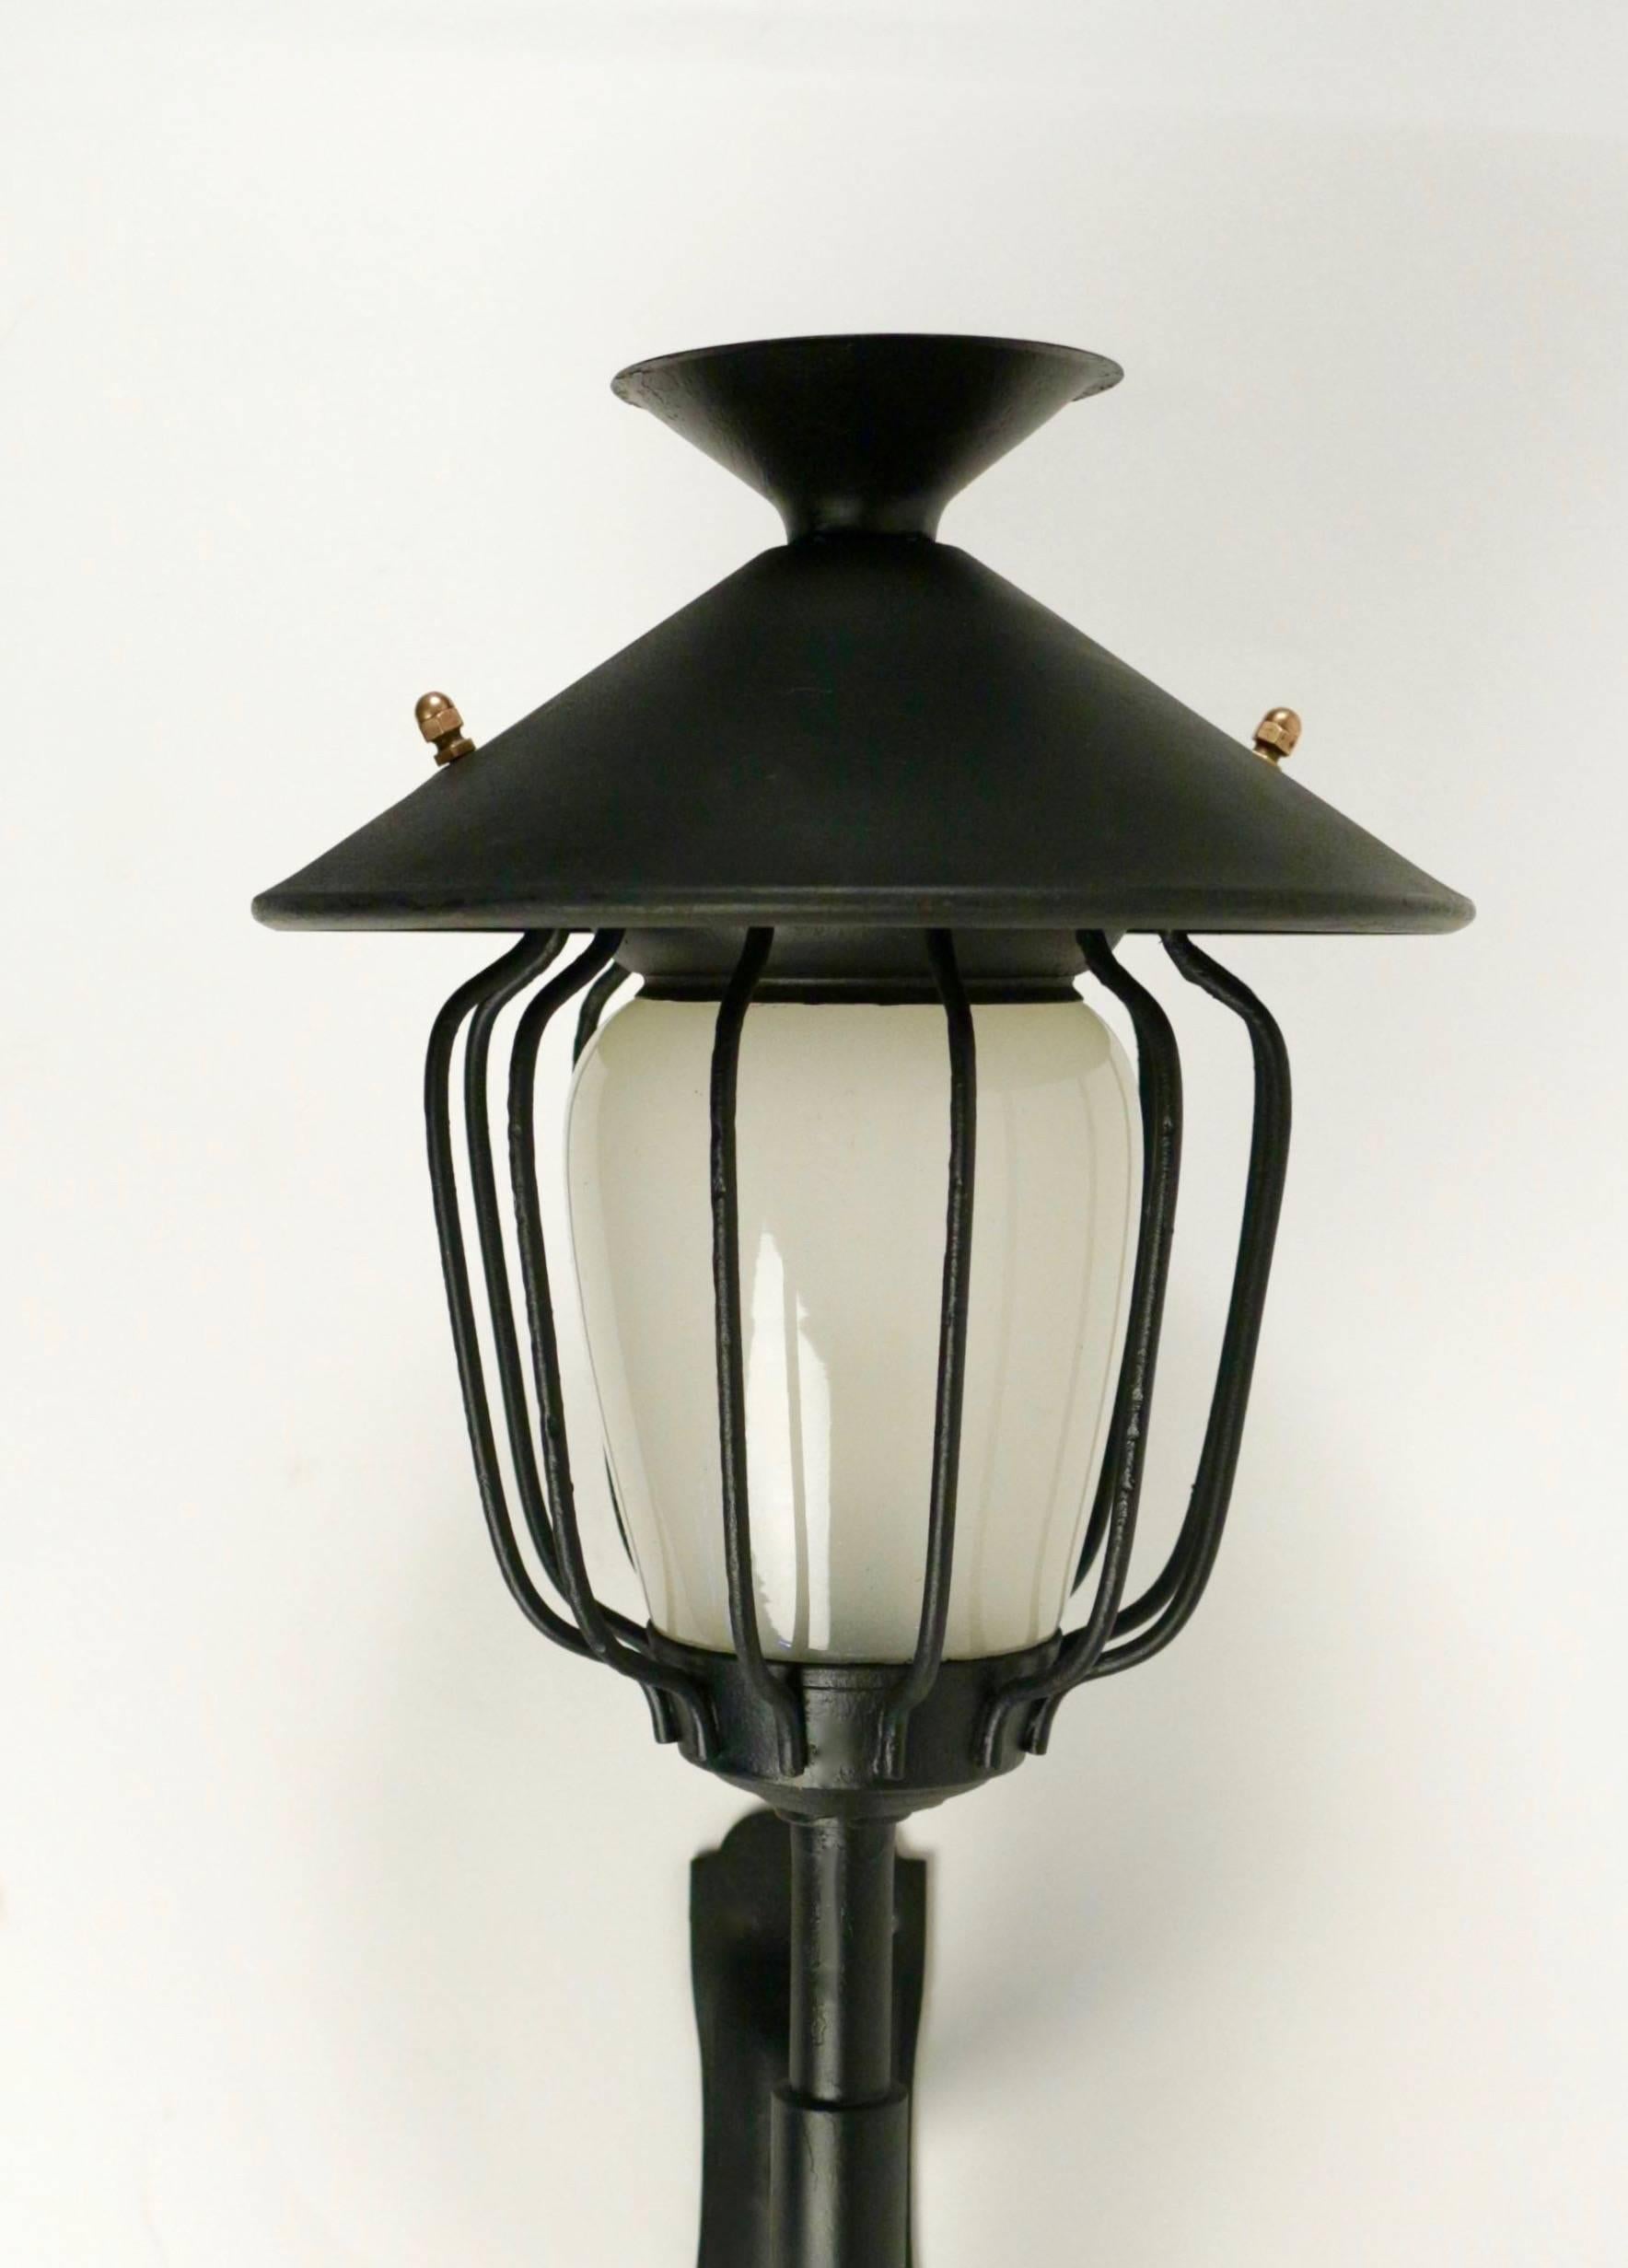 1960s large pair of flares sconces Maison Honoré.

Back plat and central stem made of black lacquered metal, ended by a brass ball.
The white satin glass lampshade is maintained by several stems which form a cage with a kind of Chinese